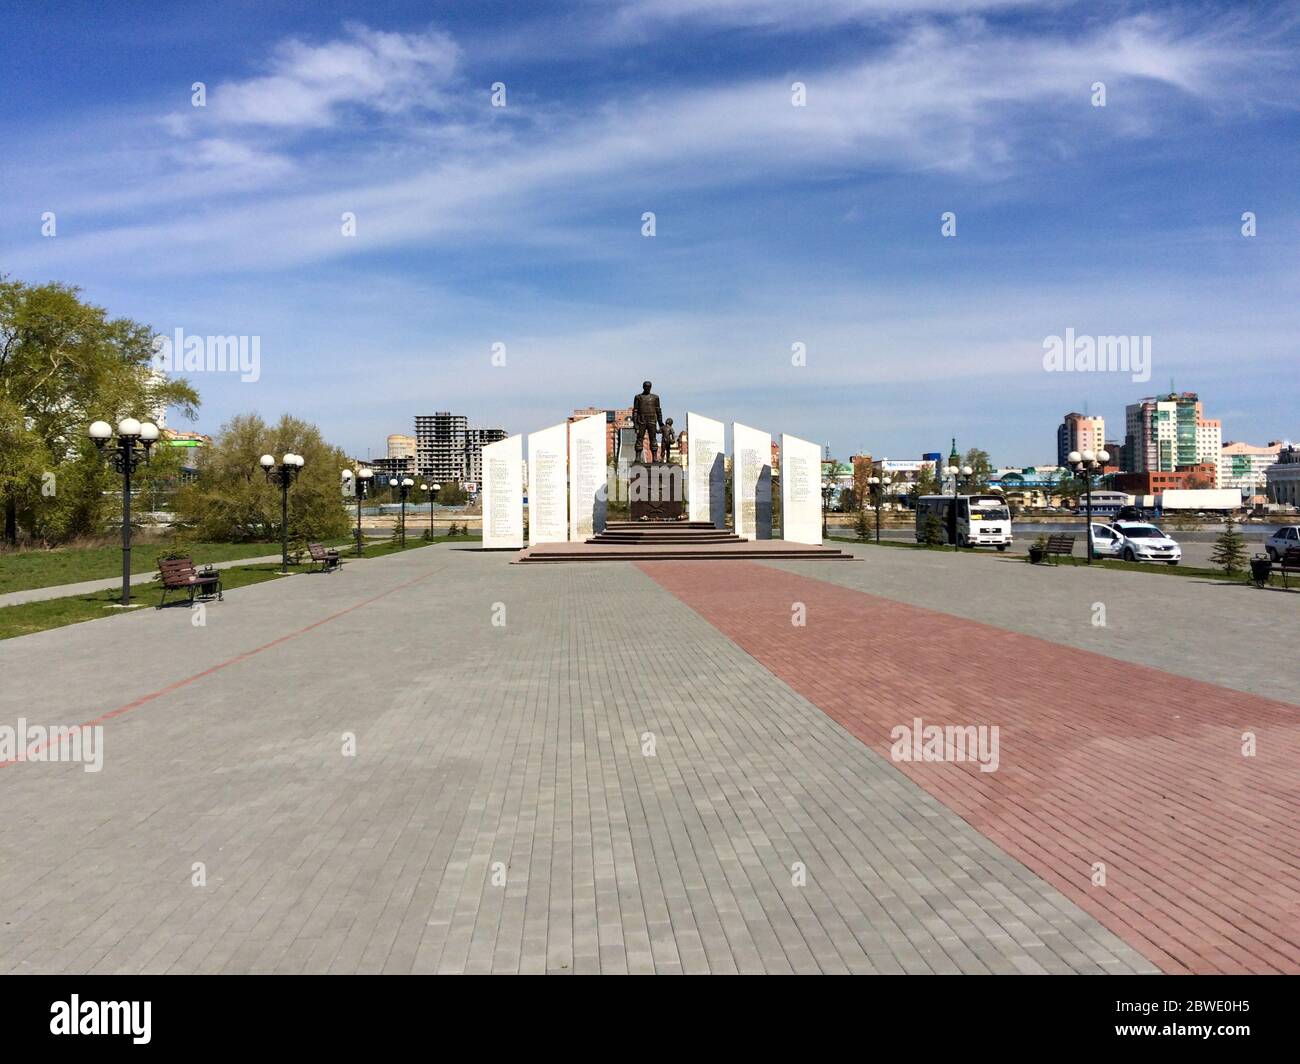 chelyabinsk, russia 06 06 2019: Symbolic statue of soldiers of the Chelyabinsk war in Russia. Stock Photo